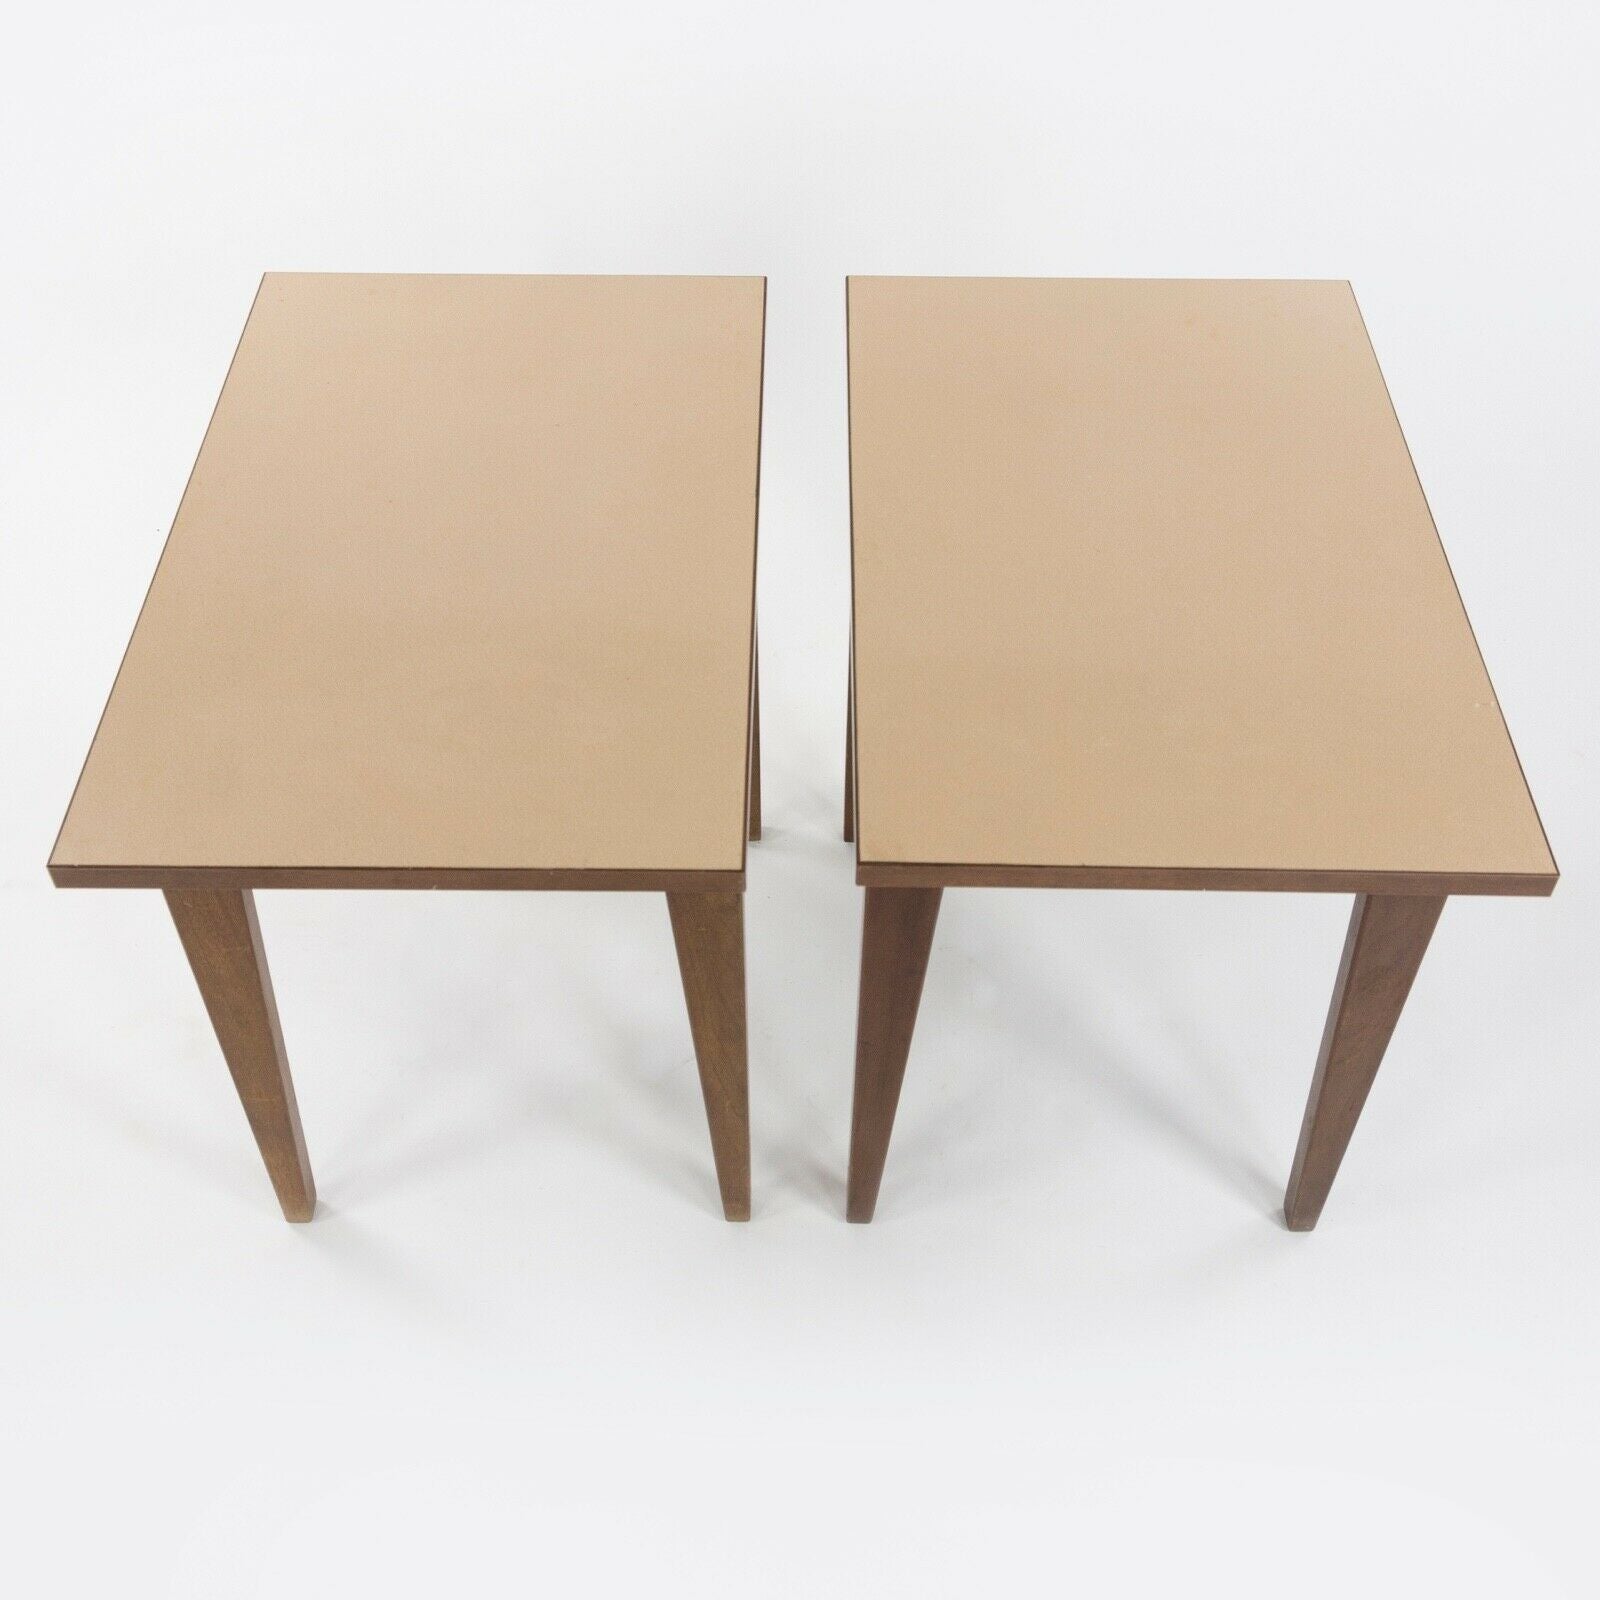 1950s Pair of Jens Risom Designs Inc Walnut & Laminate End Side Table Knoll Eames